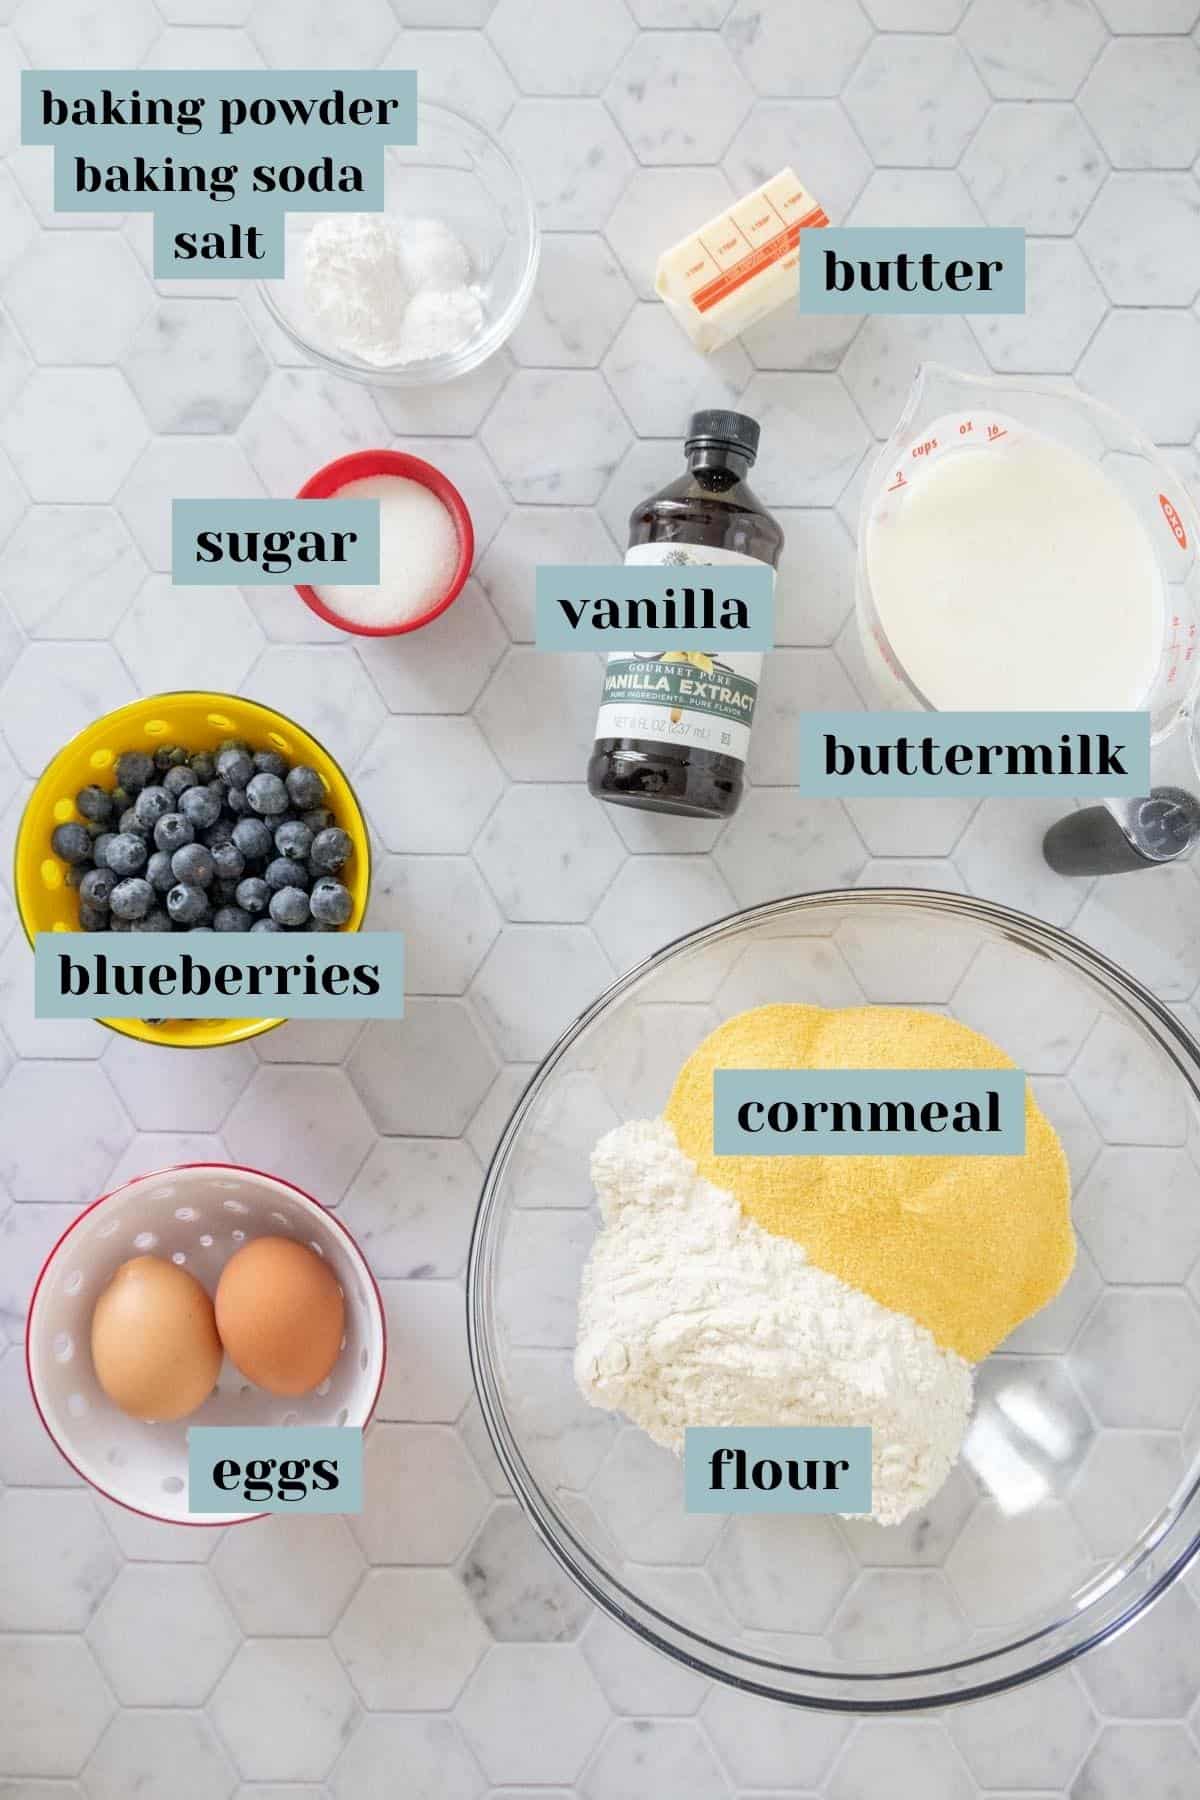 Ingredients for blueberry pancakes on a tile surface with labels.